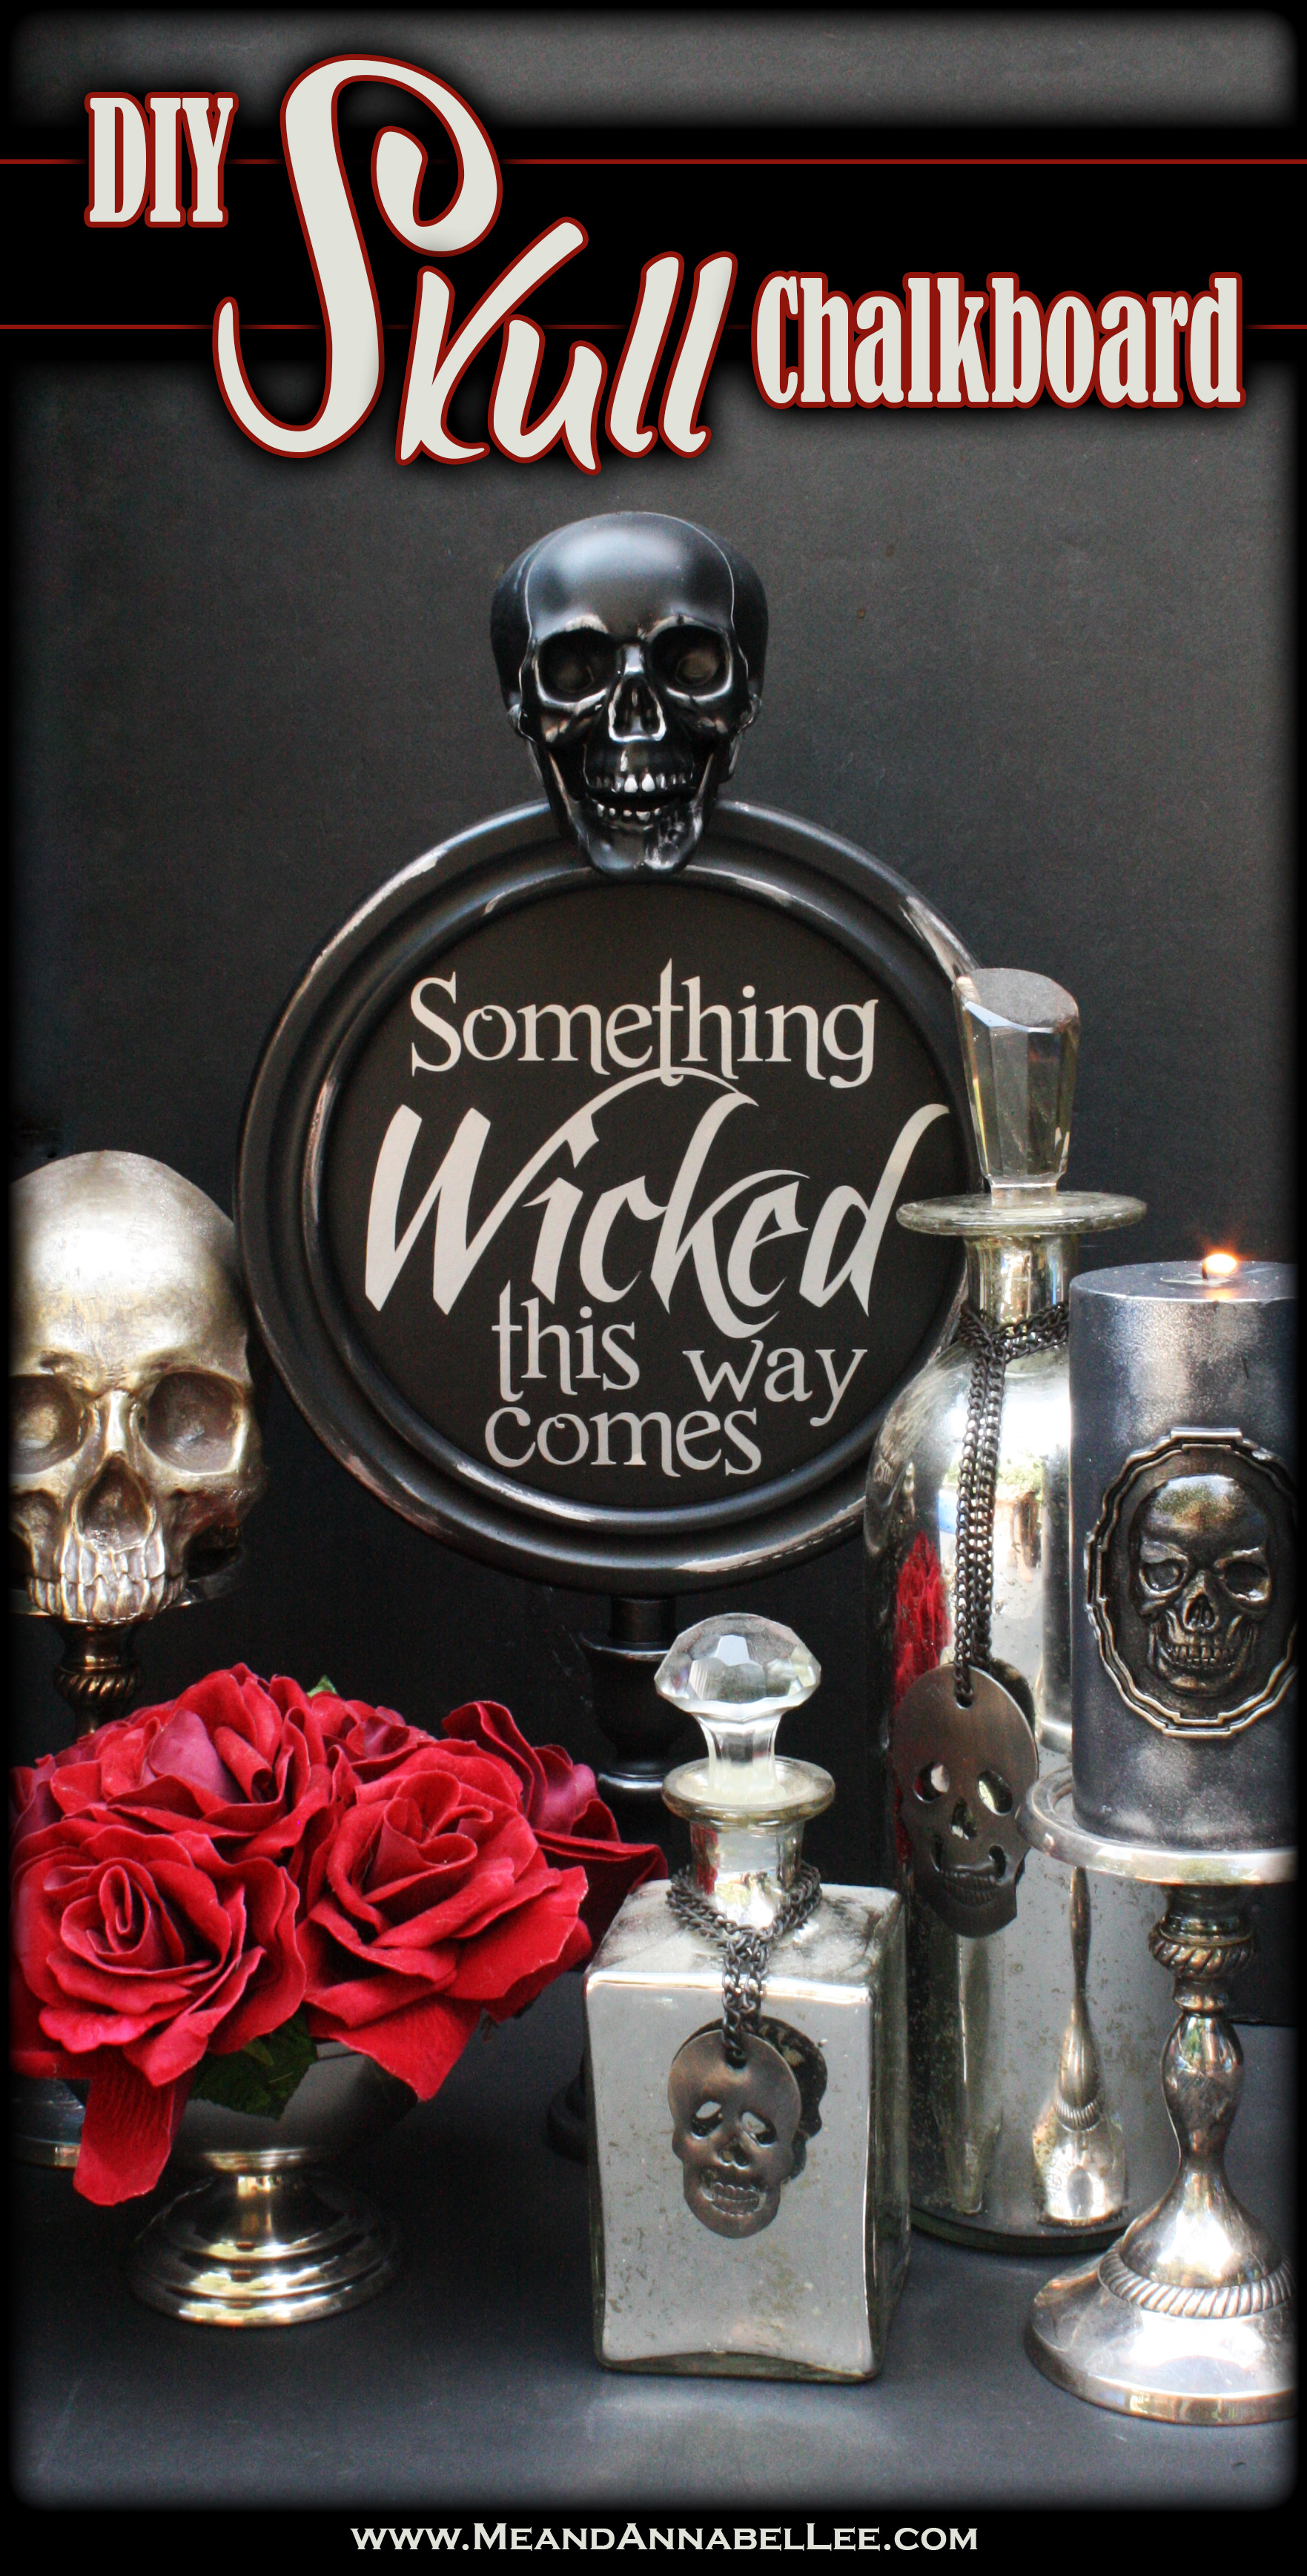 DIY Skull Chalkboard Sign | Trash to Treasure Gothic Home Décor | Halloween Crafts | Something Wicked This Way Comes | Pick Your Poison | Goth it Yourself | Cricut Vinyl Lettering |www.MeandAnnabelLee.com